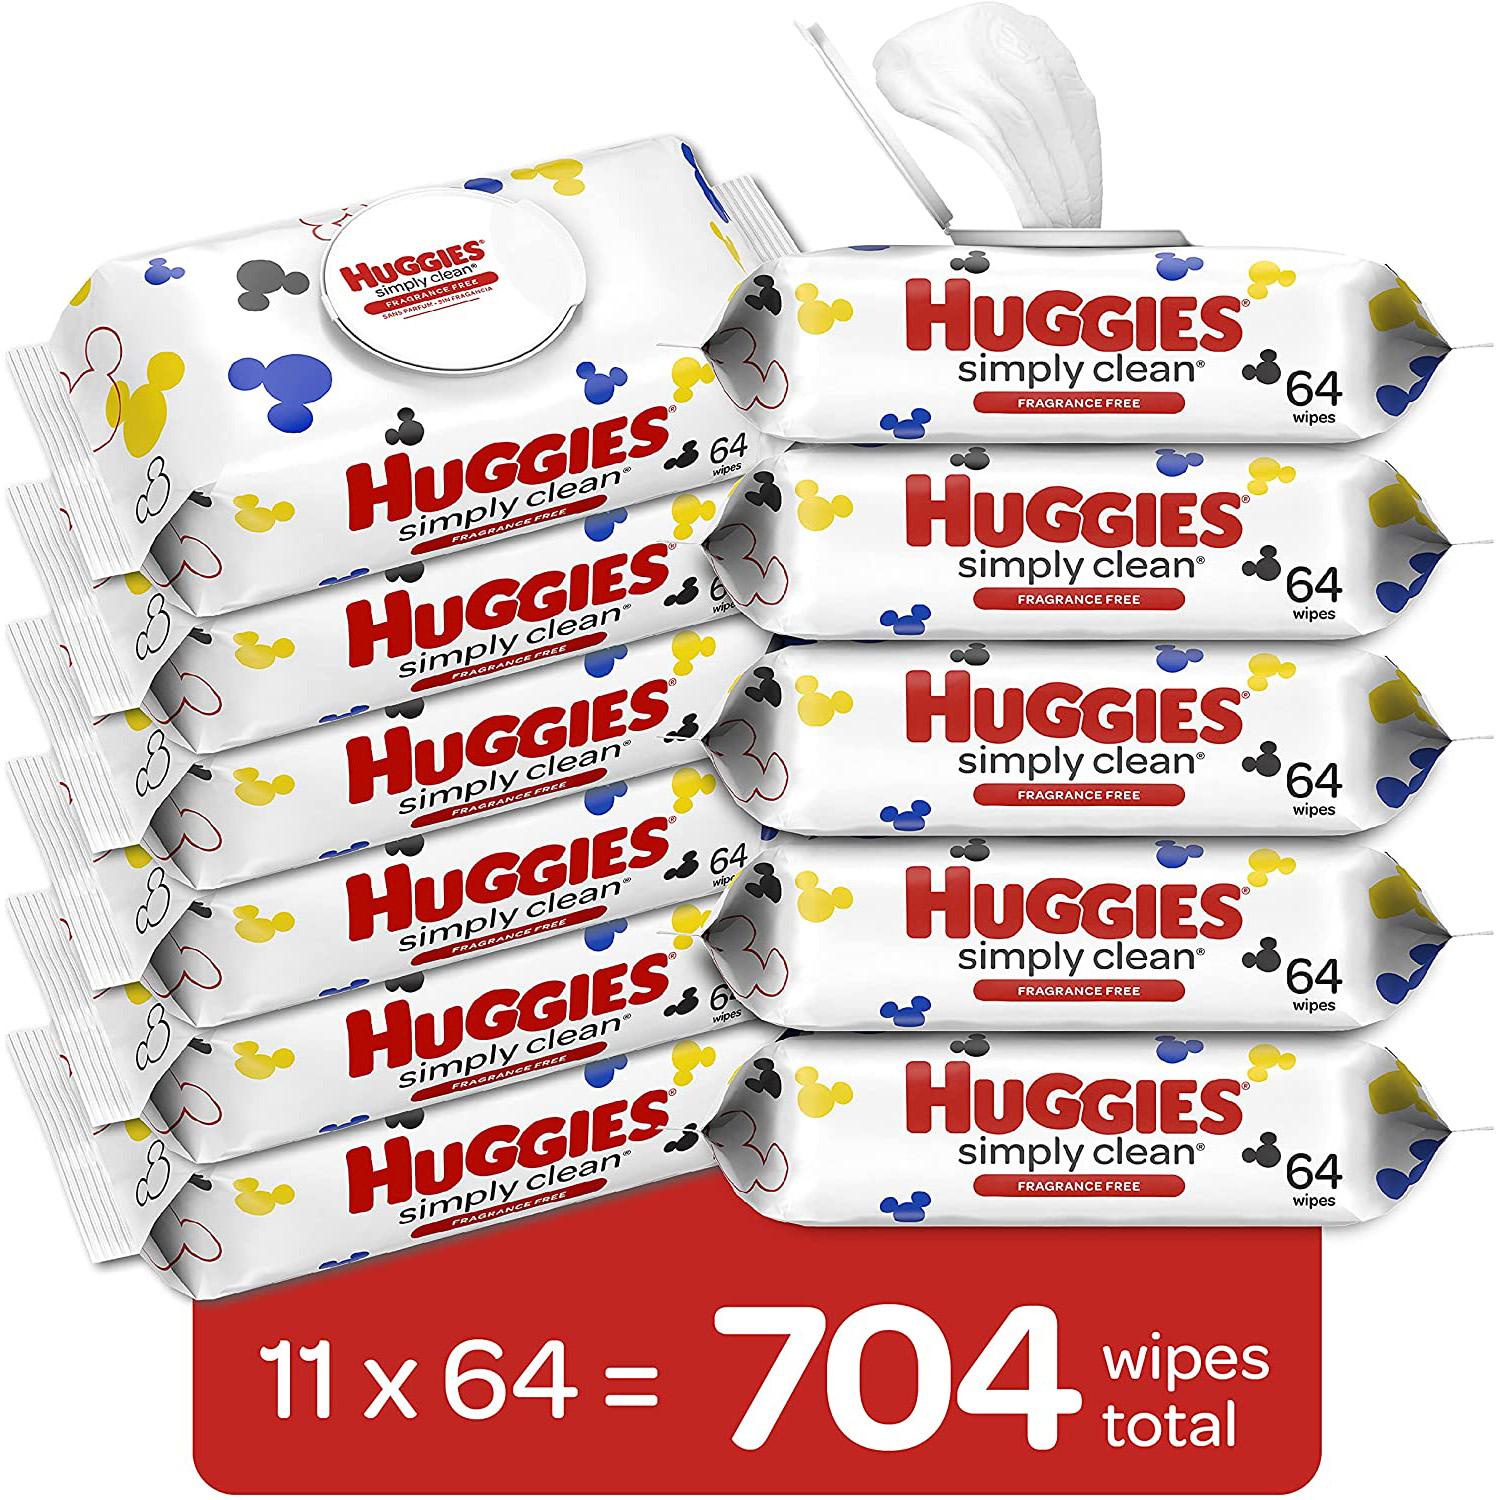 704 Huggies Simply Clean Baby Diaper Wipes for $10.49 Shipped